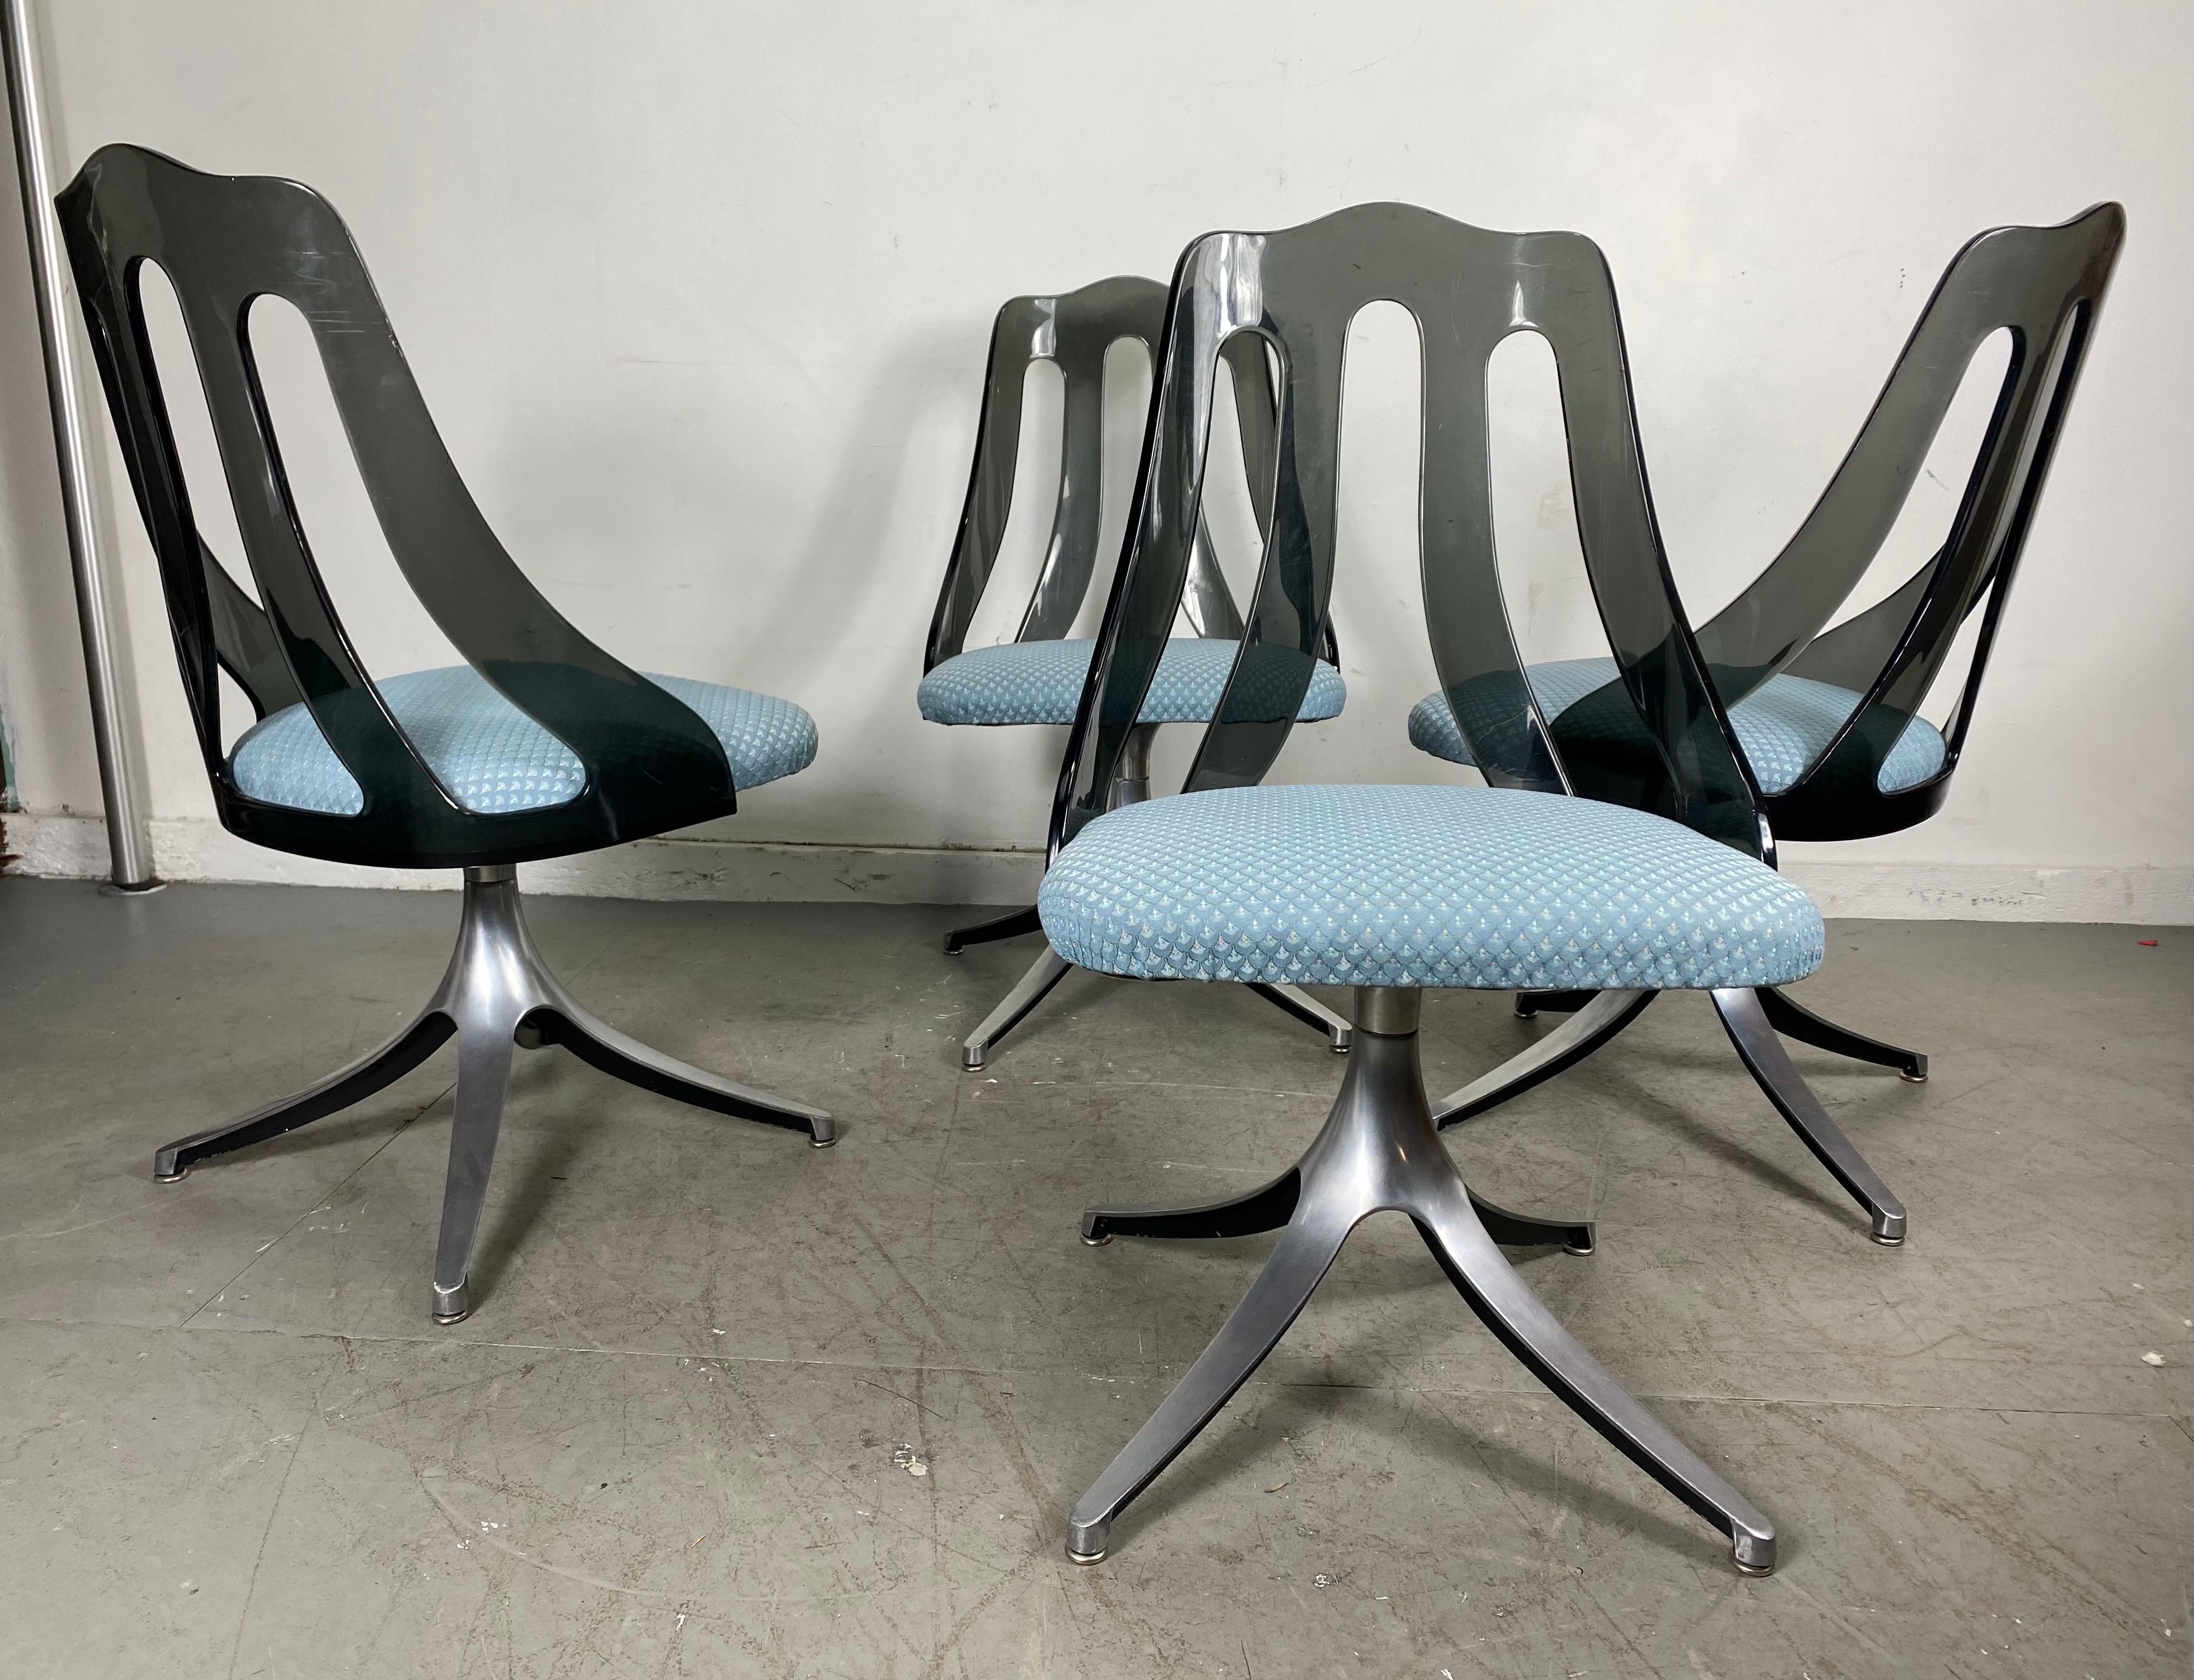 Modern Space Age smoke Lucite and chrome dining chairs by Howell / Interlake, nice set of 4 matching swivel chairs, modernist space age design, smoked Lucite / Acrylic tops in wonderful original condition, seats have been reupholstered, (prob in the